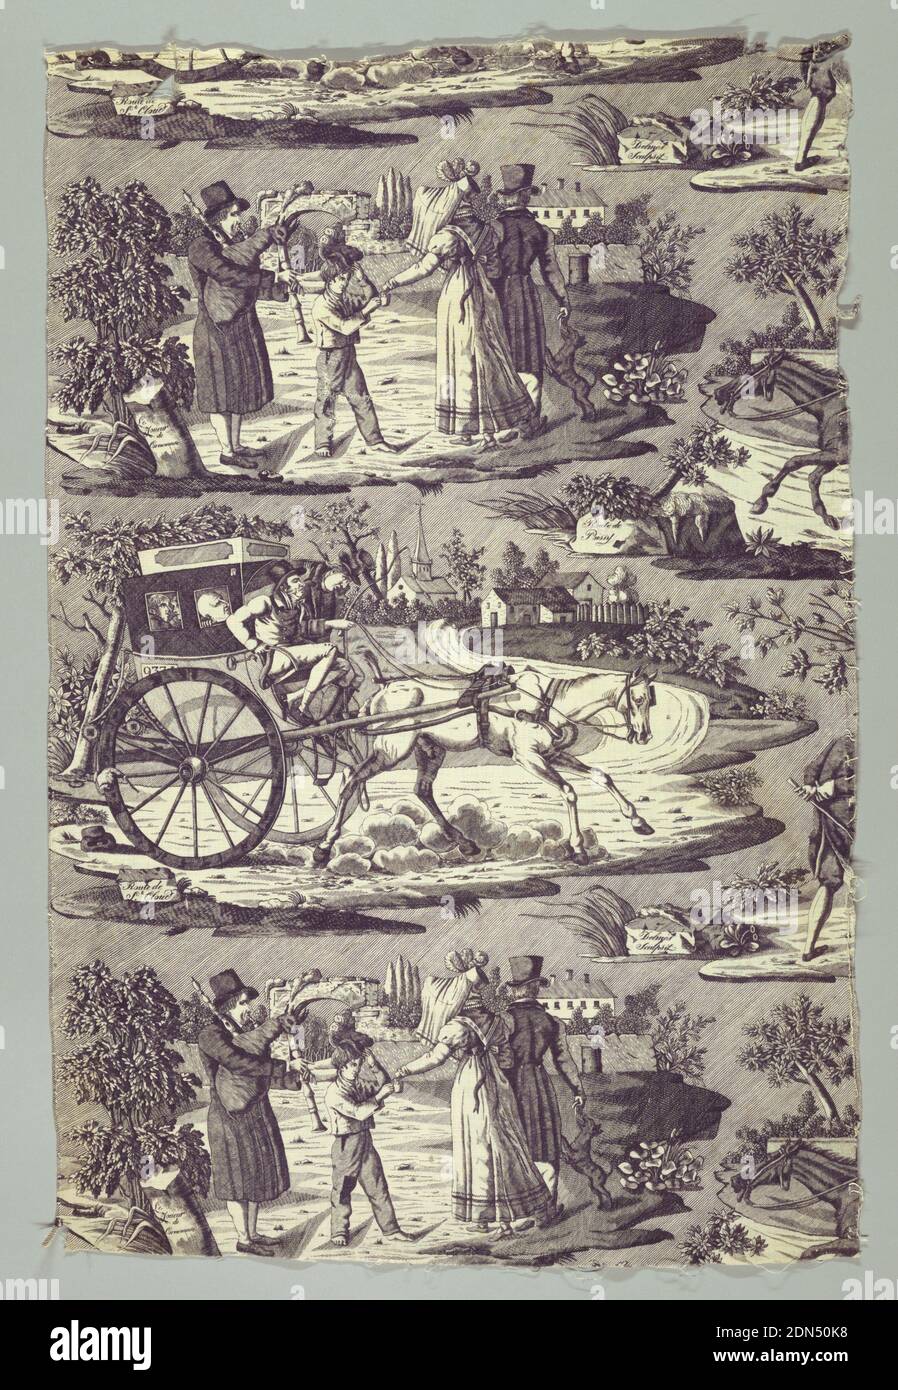 La Route de Poissy, Medium: cotton Technique: printed by engraved copper plate on plain weave, Panel of white cotton, copper plate printed in violet. Design known as 'La Route de Poissey.' Shows four scenes: 1) Men bowling, and on stone at side 'Les Joueurs de Boules;' 2) Fat man on horseback and thin man smoking pipe. Inscription on stone 'Route de Poissy' 3) Man playing bagpipe, and boy receiving money from a lady, on a stone at side 'Joueur de Carnemuse;' a carriage with two men on the box and passengers inside. Drawn by a jaded horse. Inscription on stone at side 'Route de St. Cloud.' Stock Photo